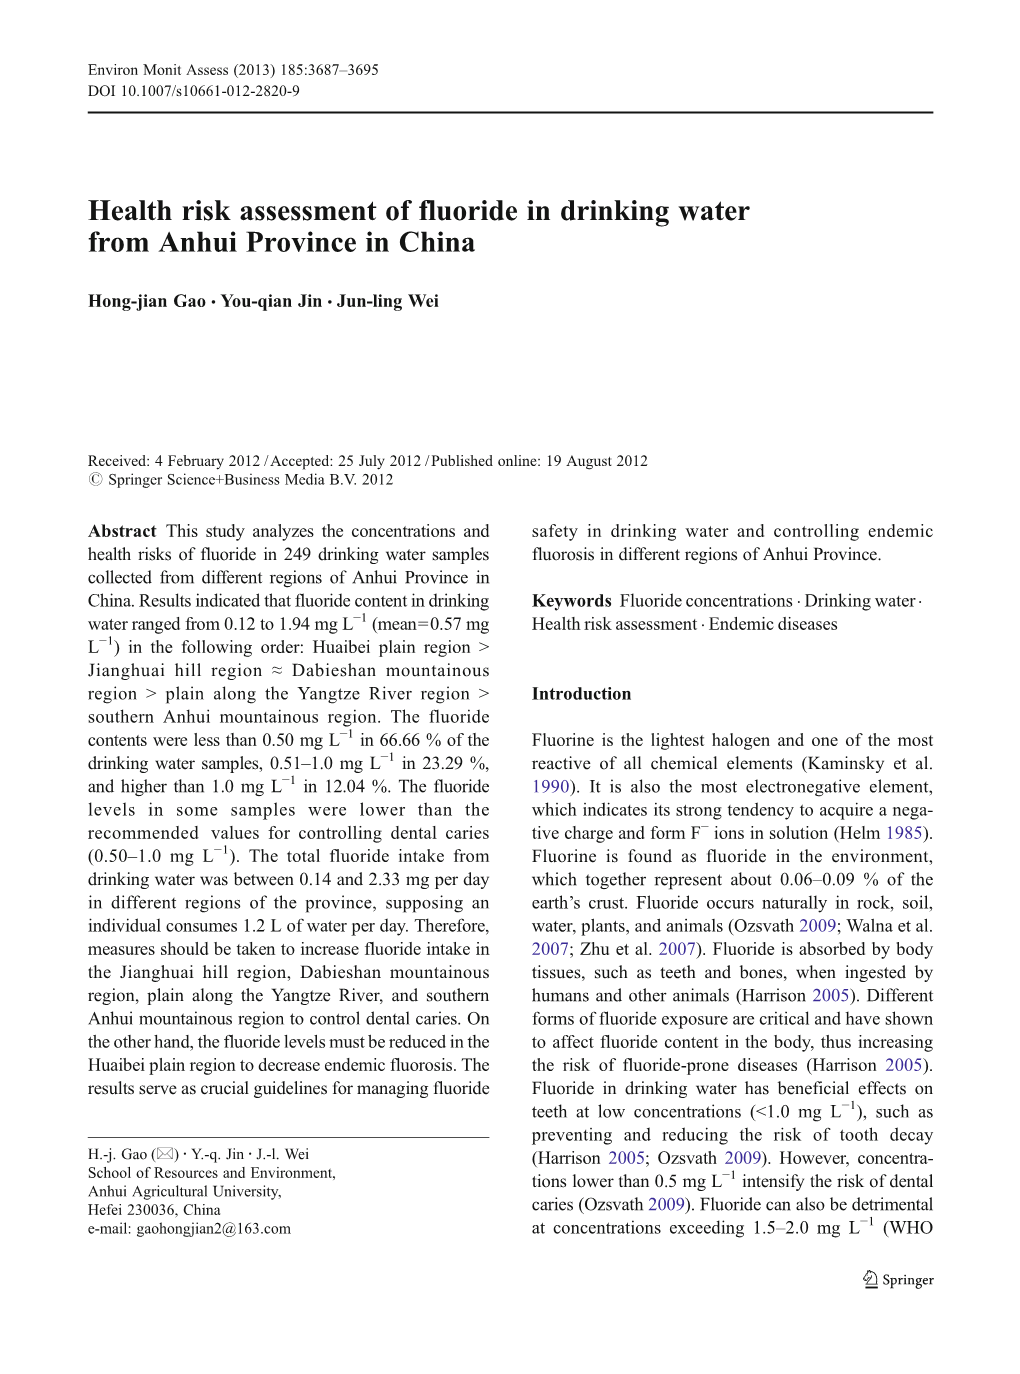 Health Risk Assessment of Fluoride in Drinking Water from Anhui Province in China